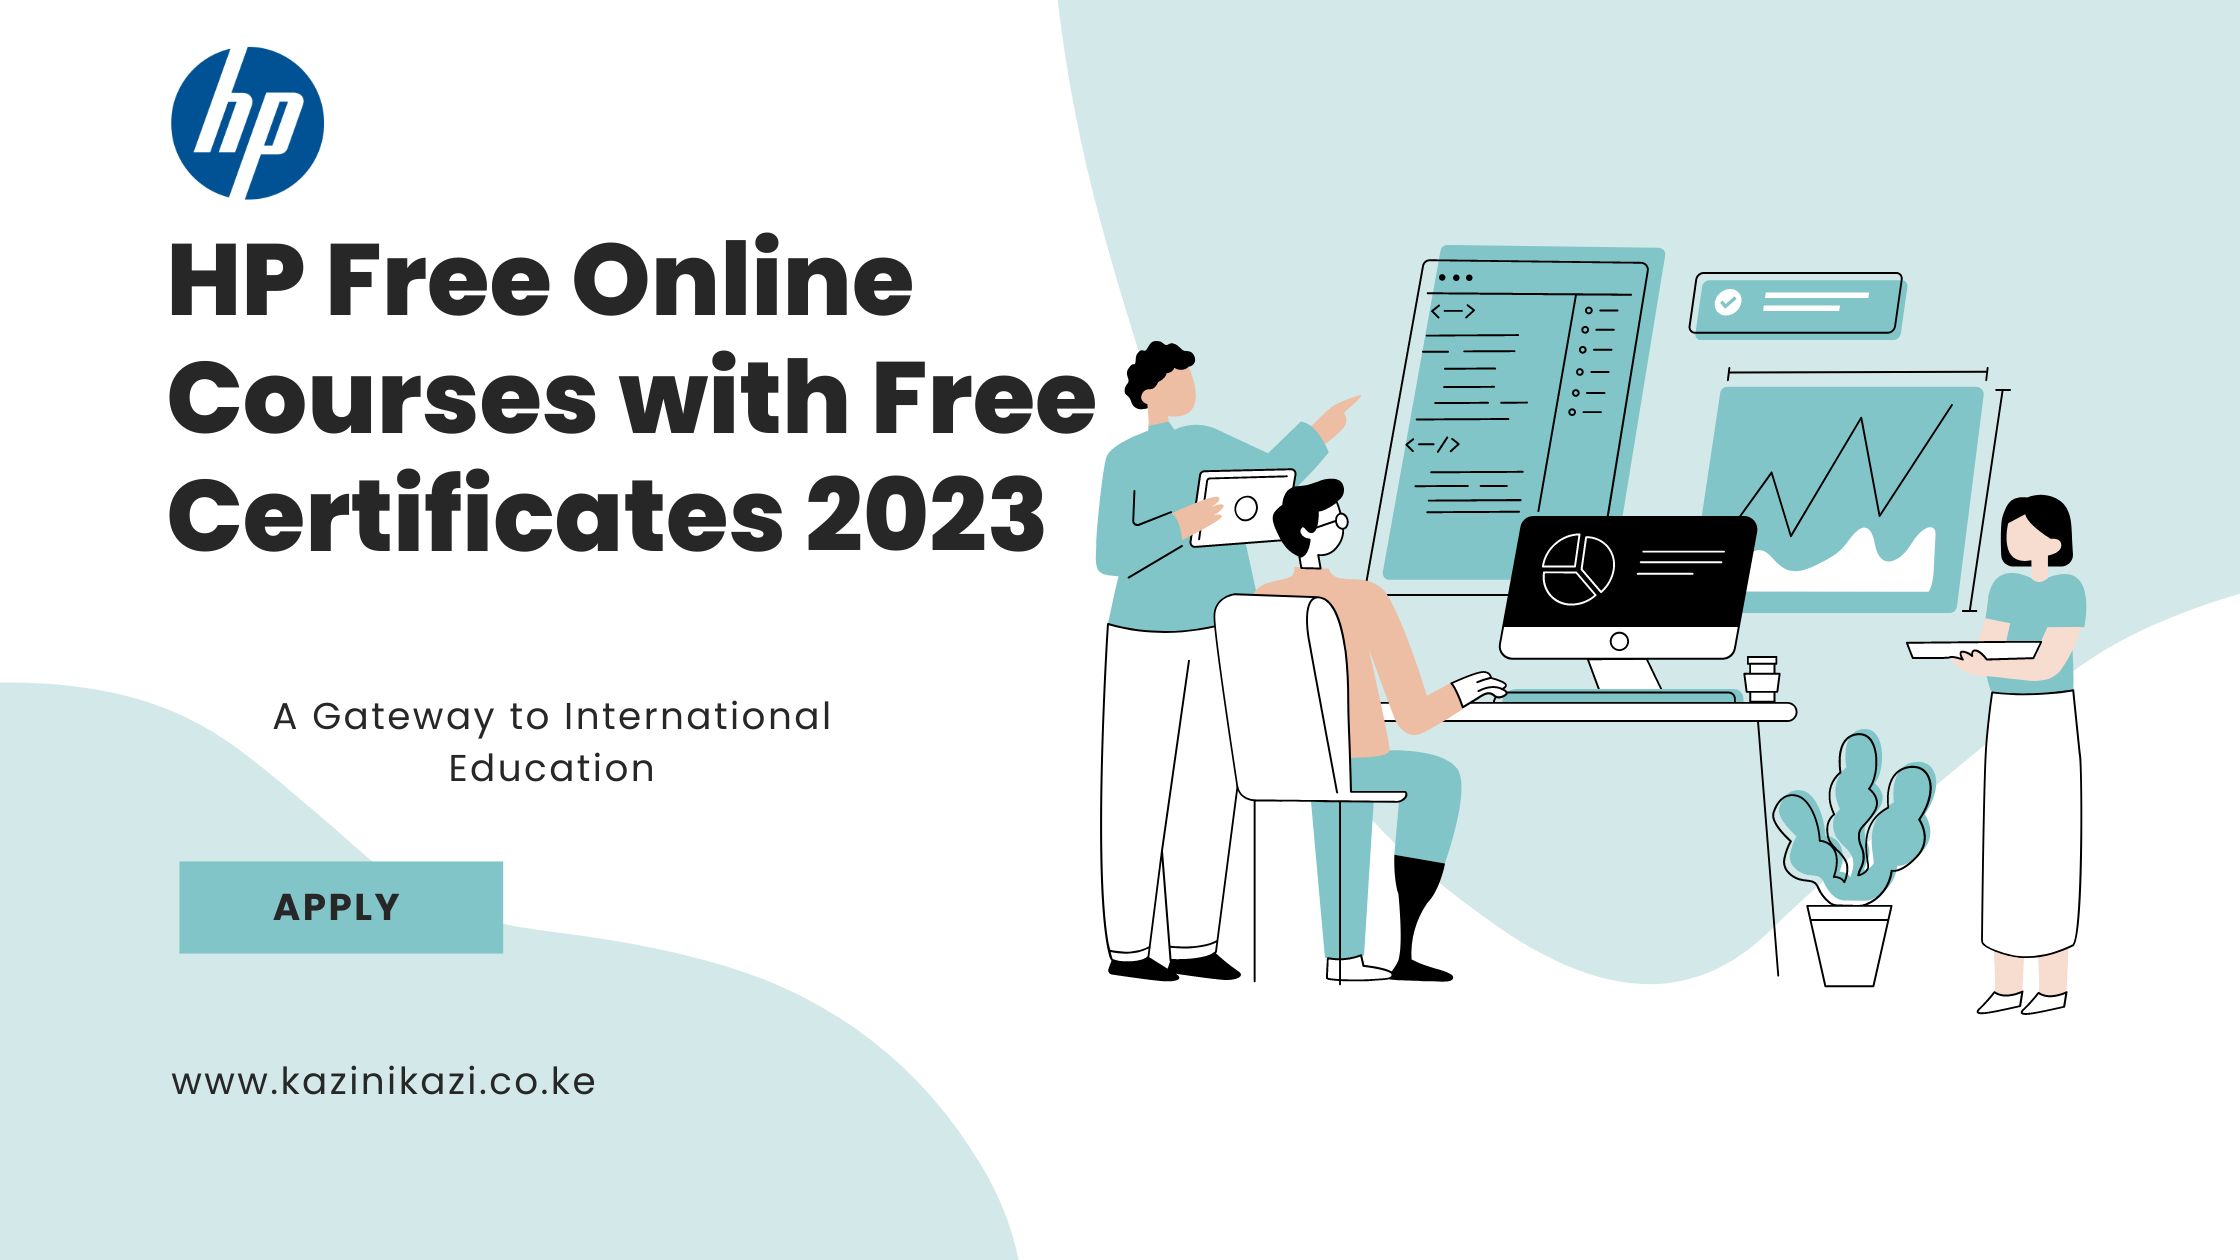 HP Free Online Courses with Free Certificates 2023: A Gateway to International Education